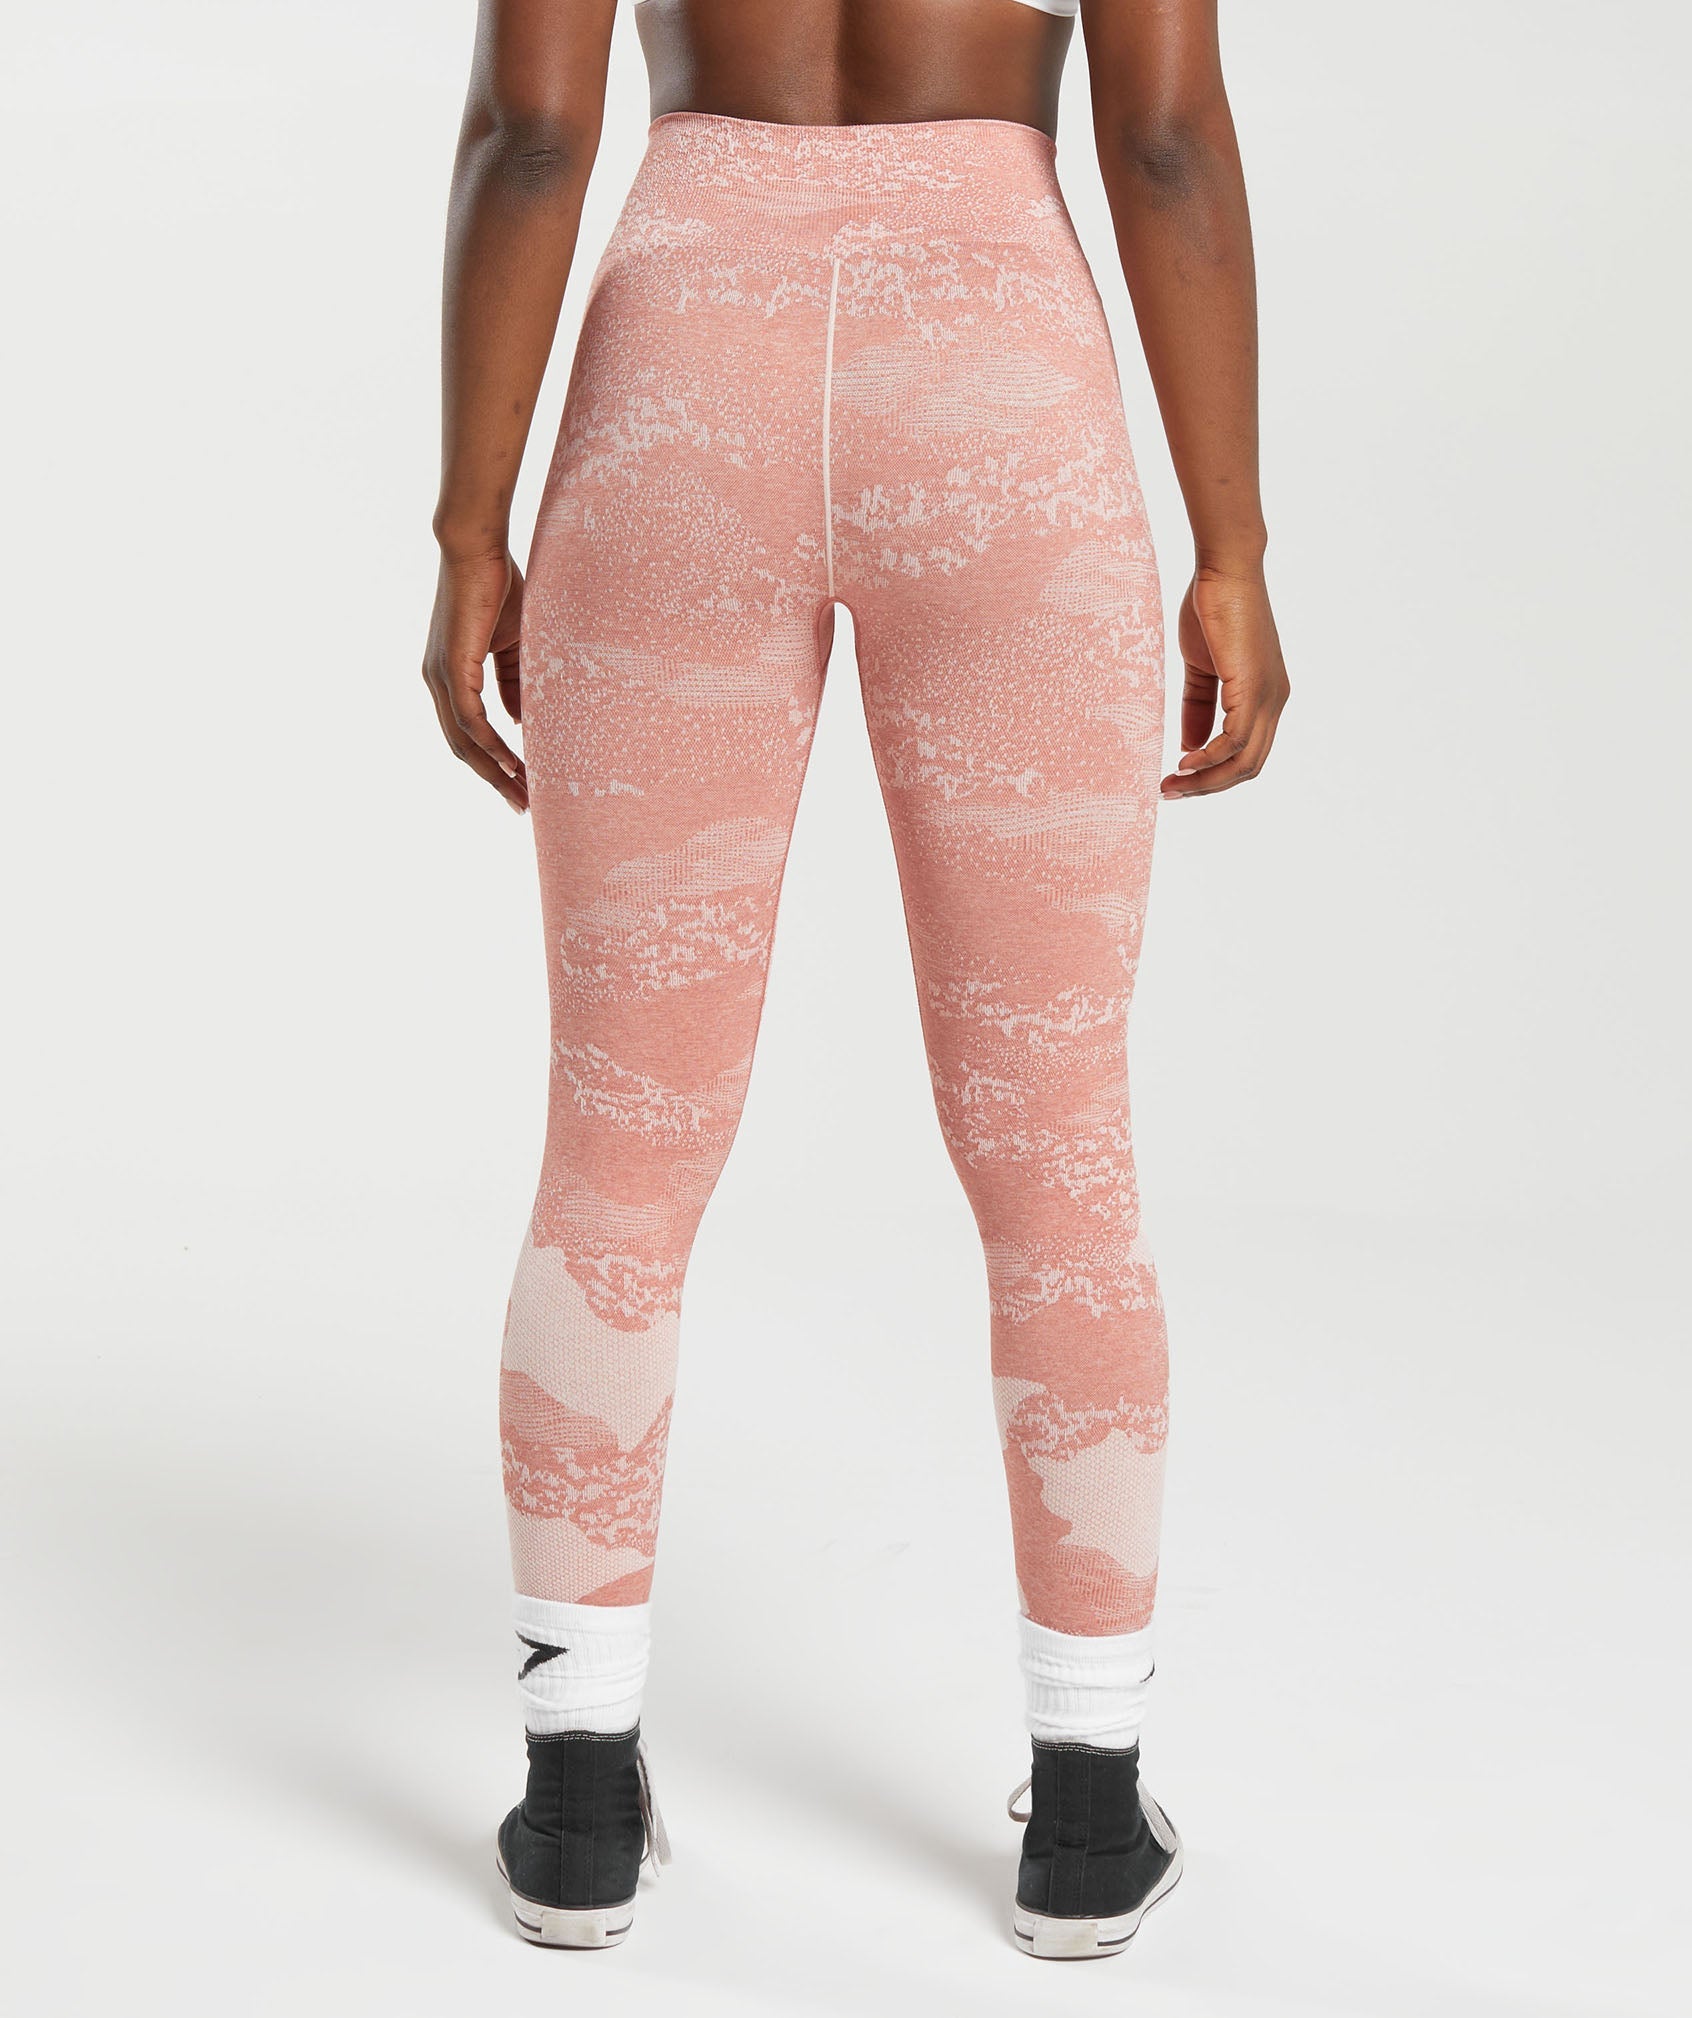 Adapt Camo Seamless Leggings in Misty Pink/Hazy Pink - view 2